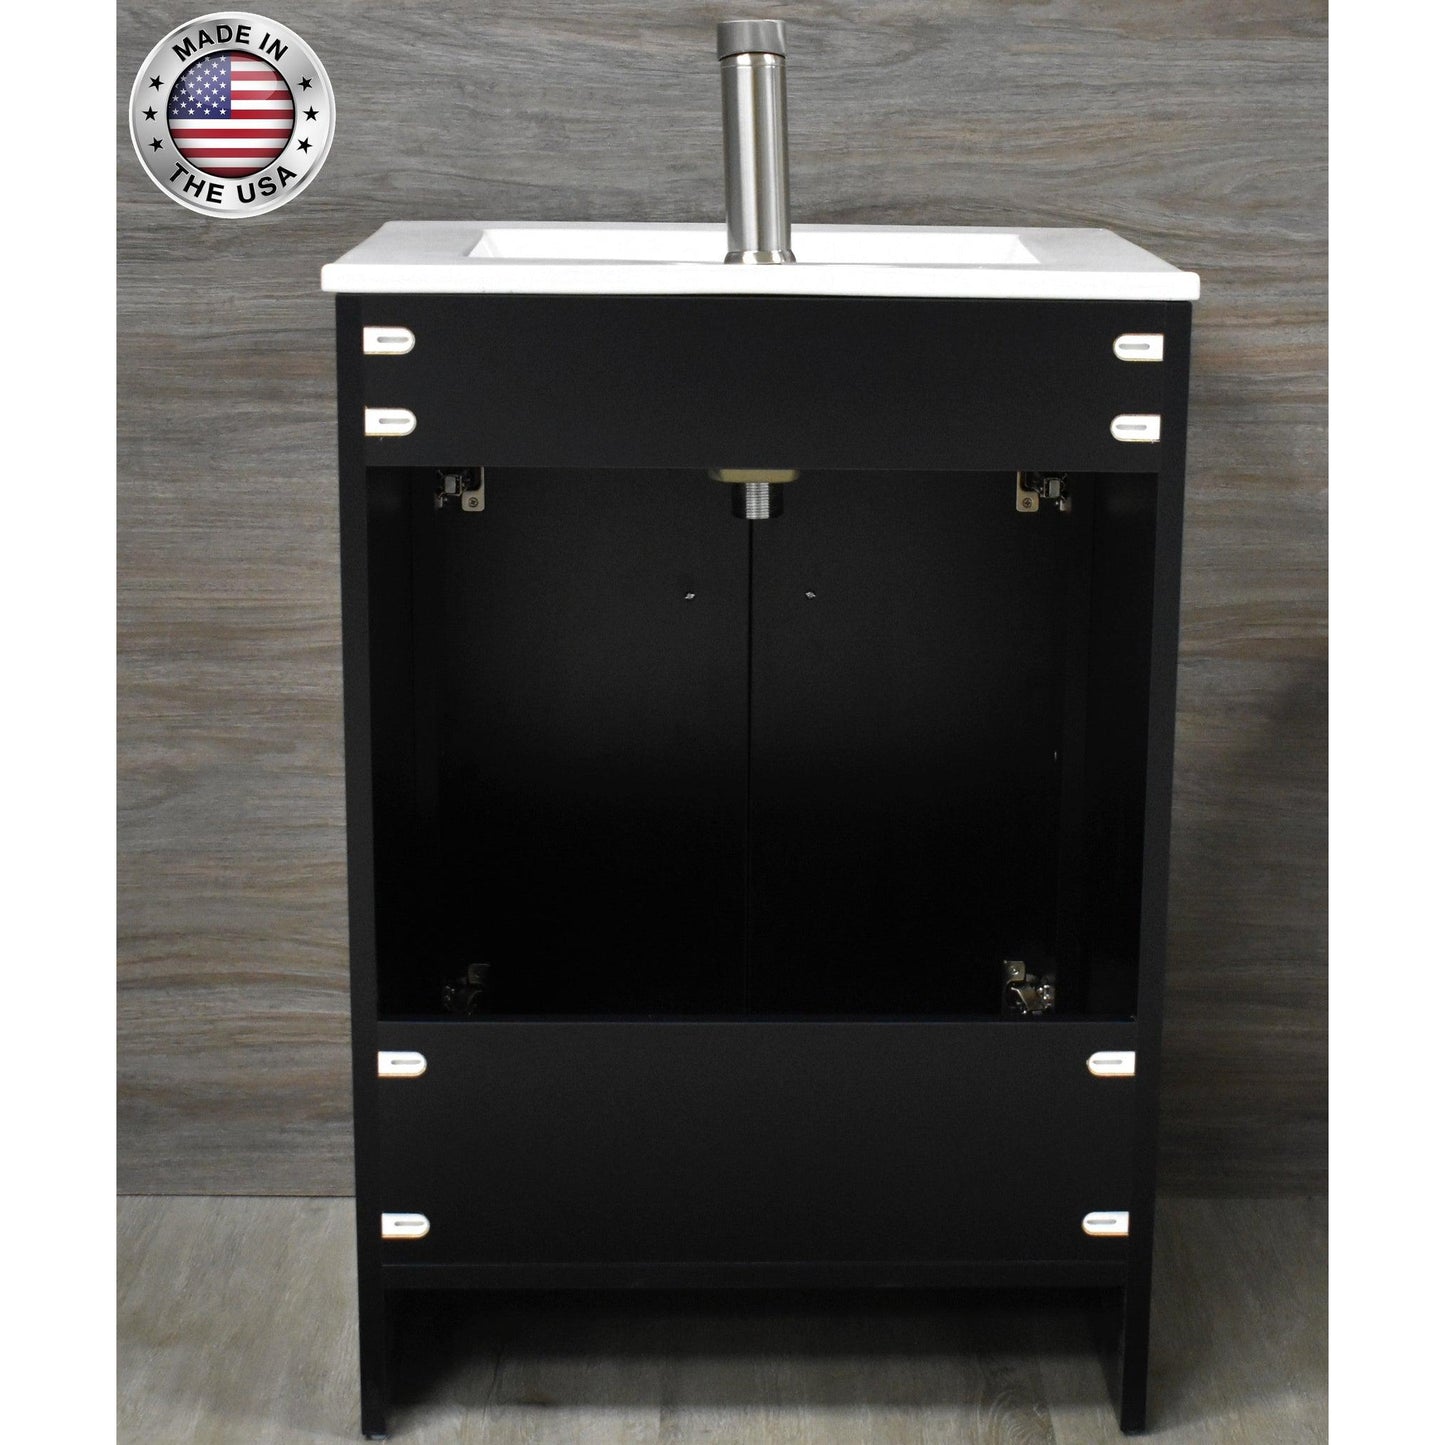 Volpa USA Villa 24" Black Freestanding Modern Bathroom Vanity With Integrated Ceramic Top and Brushed Nickel Round Handles